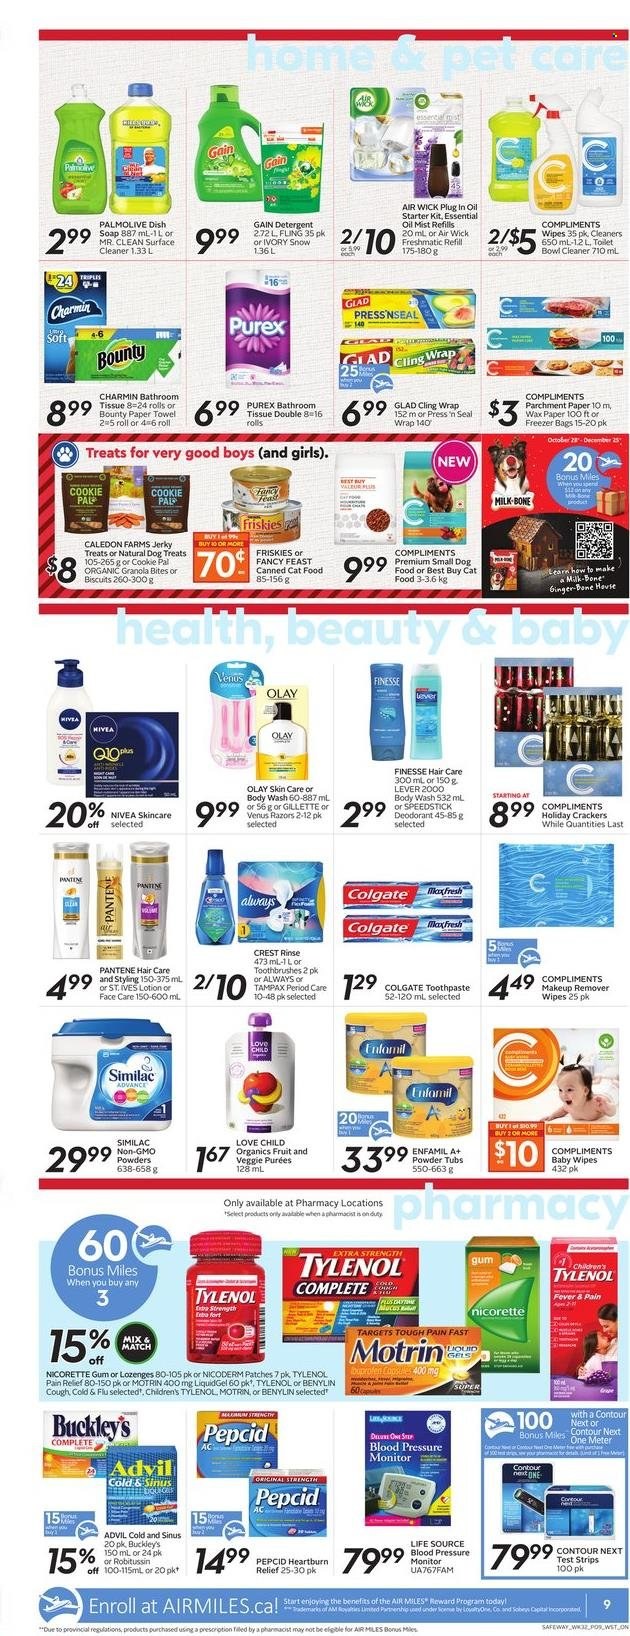 thumbnail - Safeway Flyer - December 02, 2021 - December 08, 2021 - Sales products - donut, jerky, milk, Bounty, crackers, biscuit, Enfamil, Similac, wipes, baby wipes, bath tissue, paper towels, Charmin, Gain, surface cleaner, cleaner, Purex, body wash, Palmolive, soap, toothpaste, Crest, Olay, body lotion, anti-perspirant, Venus, makeup remover, contour, animal food, cat food, Fancy Feast, Friskies, pain relief, Cold & Flu, NicoDerm, Nicorette, Tylenol, Pepcid, Advil Rapid, Nicorette Gum, Benylin, Motrin, pressure monitor, detergent, Colgate, Gillette, granola, Robitussin, Tampax, Pantene, Nivea, deodorant. Page 10.